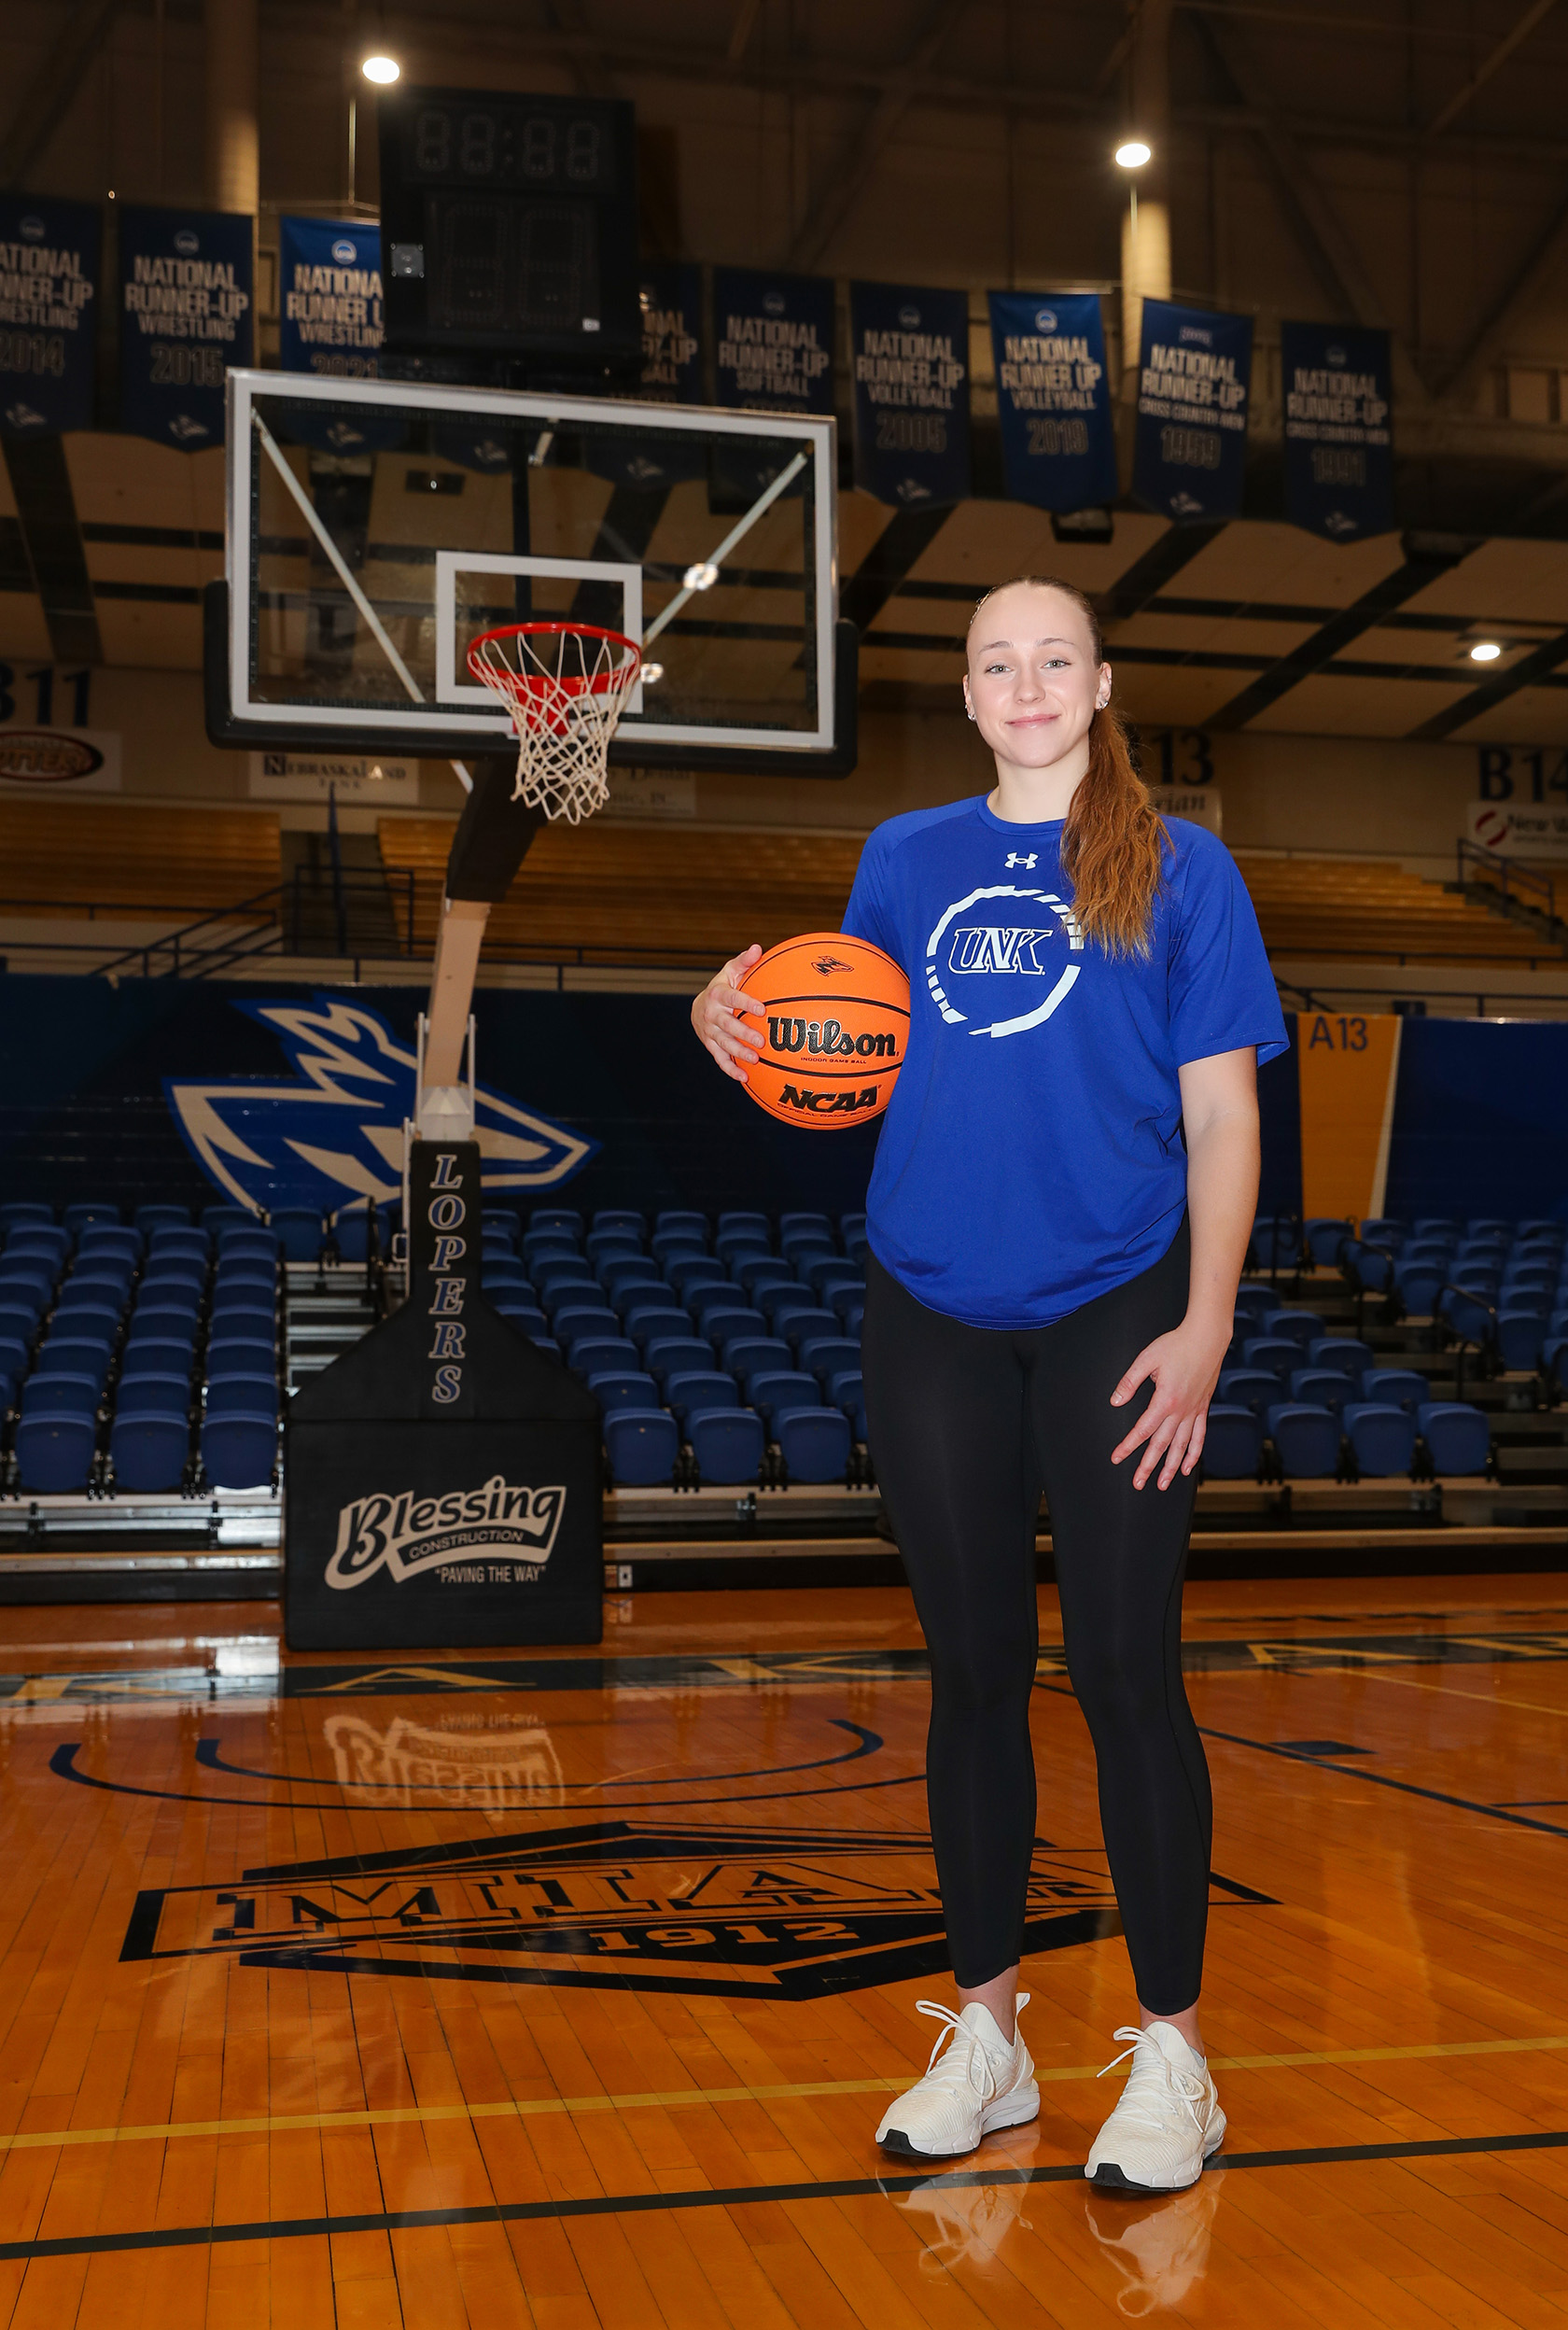 Shiloh McCool ranks fourth in UNK women’s basketball history with 22 career double-doubles, fifth in rebounds with 791 and 20th in points with 1,203.